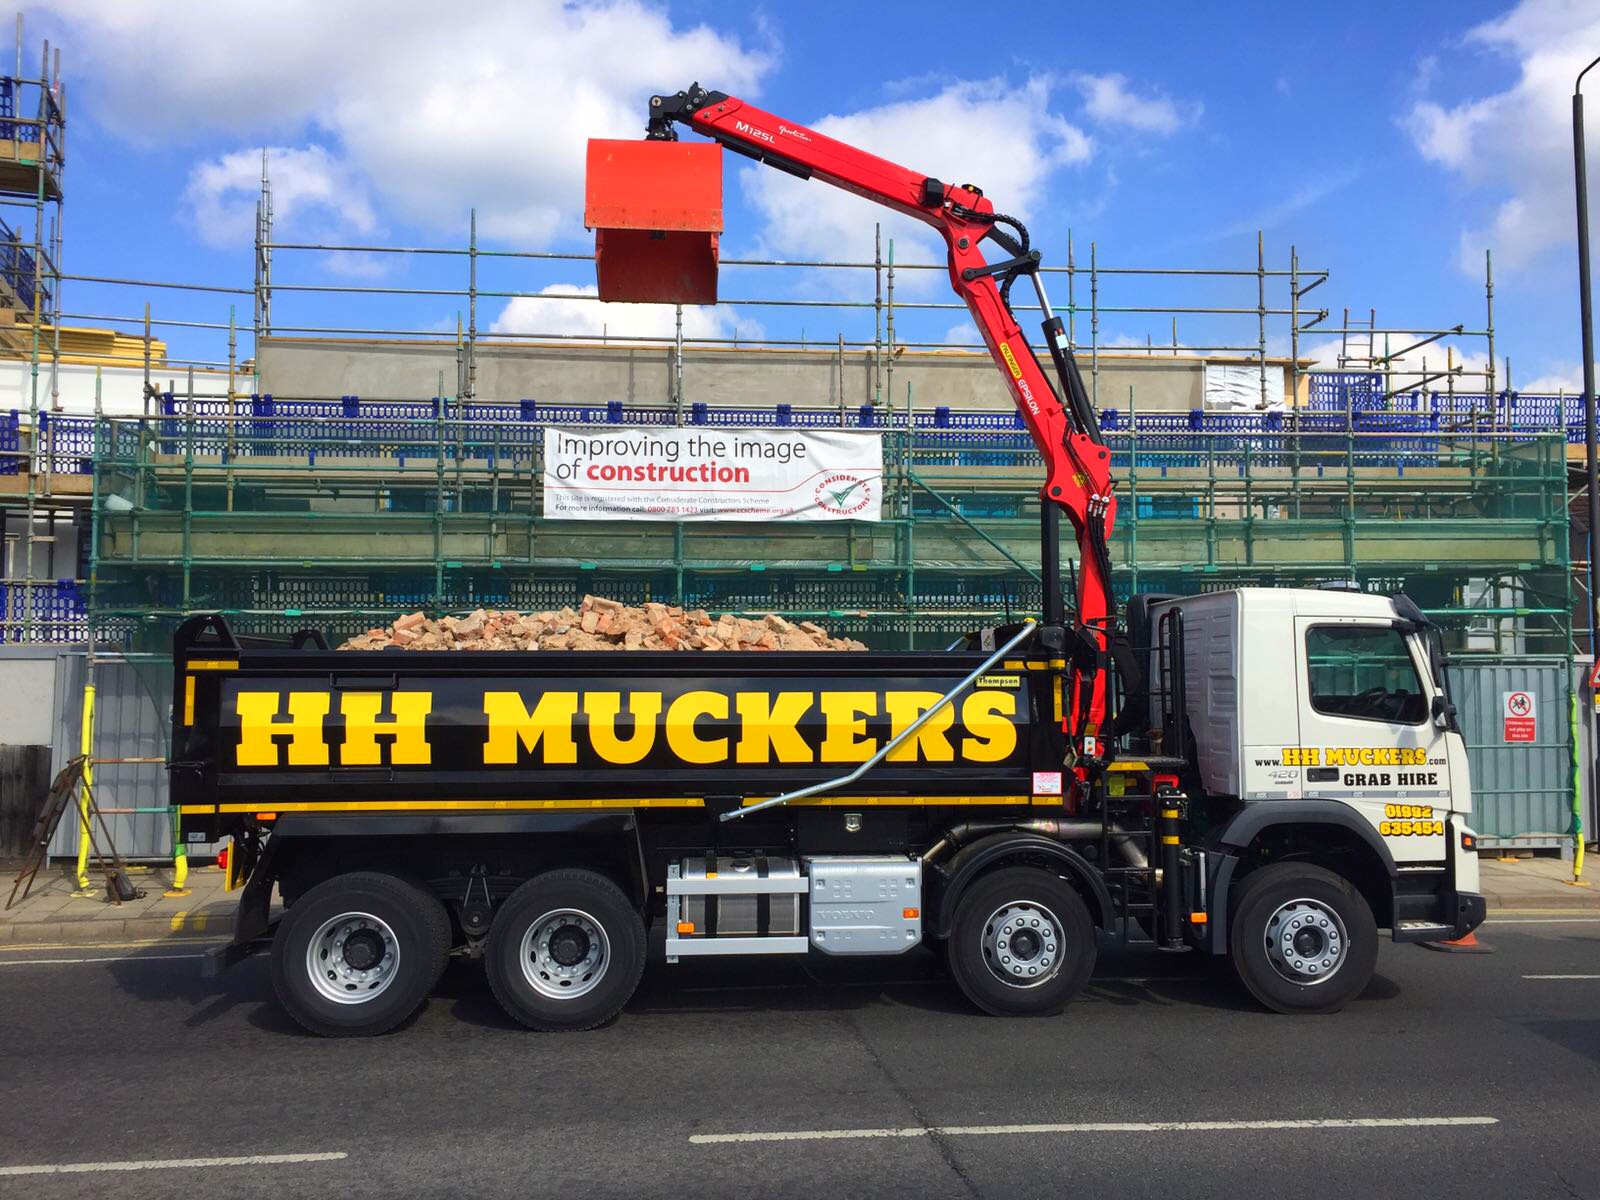 HH-Muckers-Grab-Hire-Lorry-2017-Construction